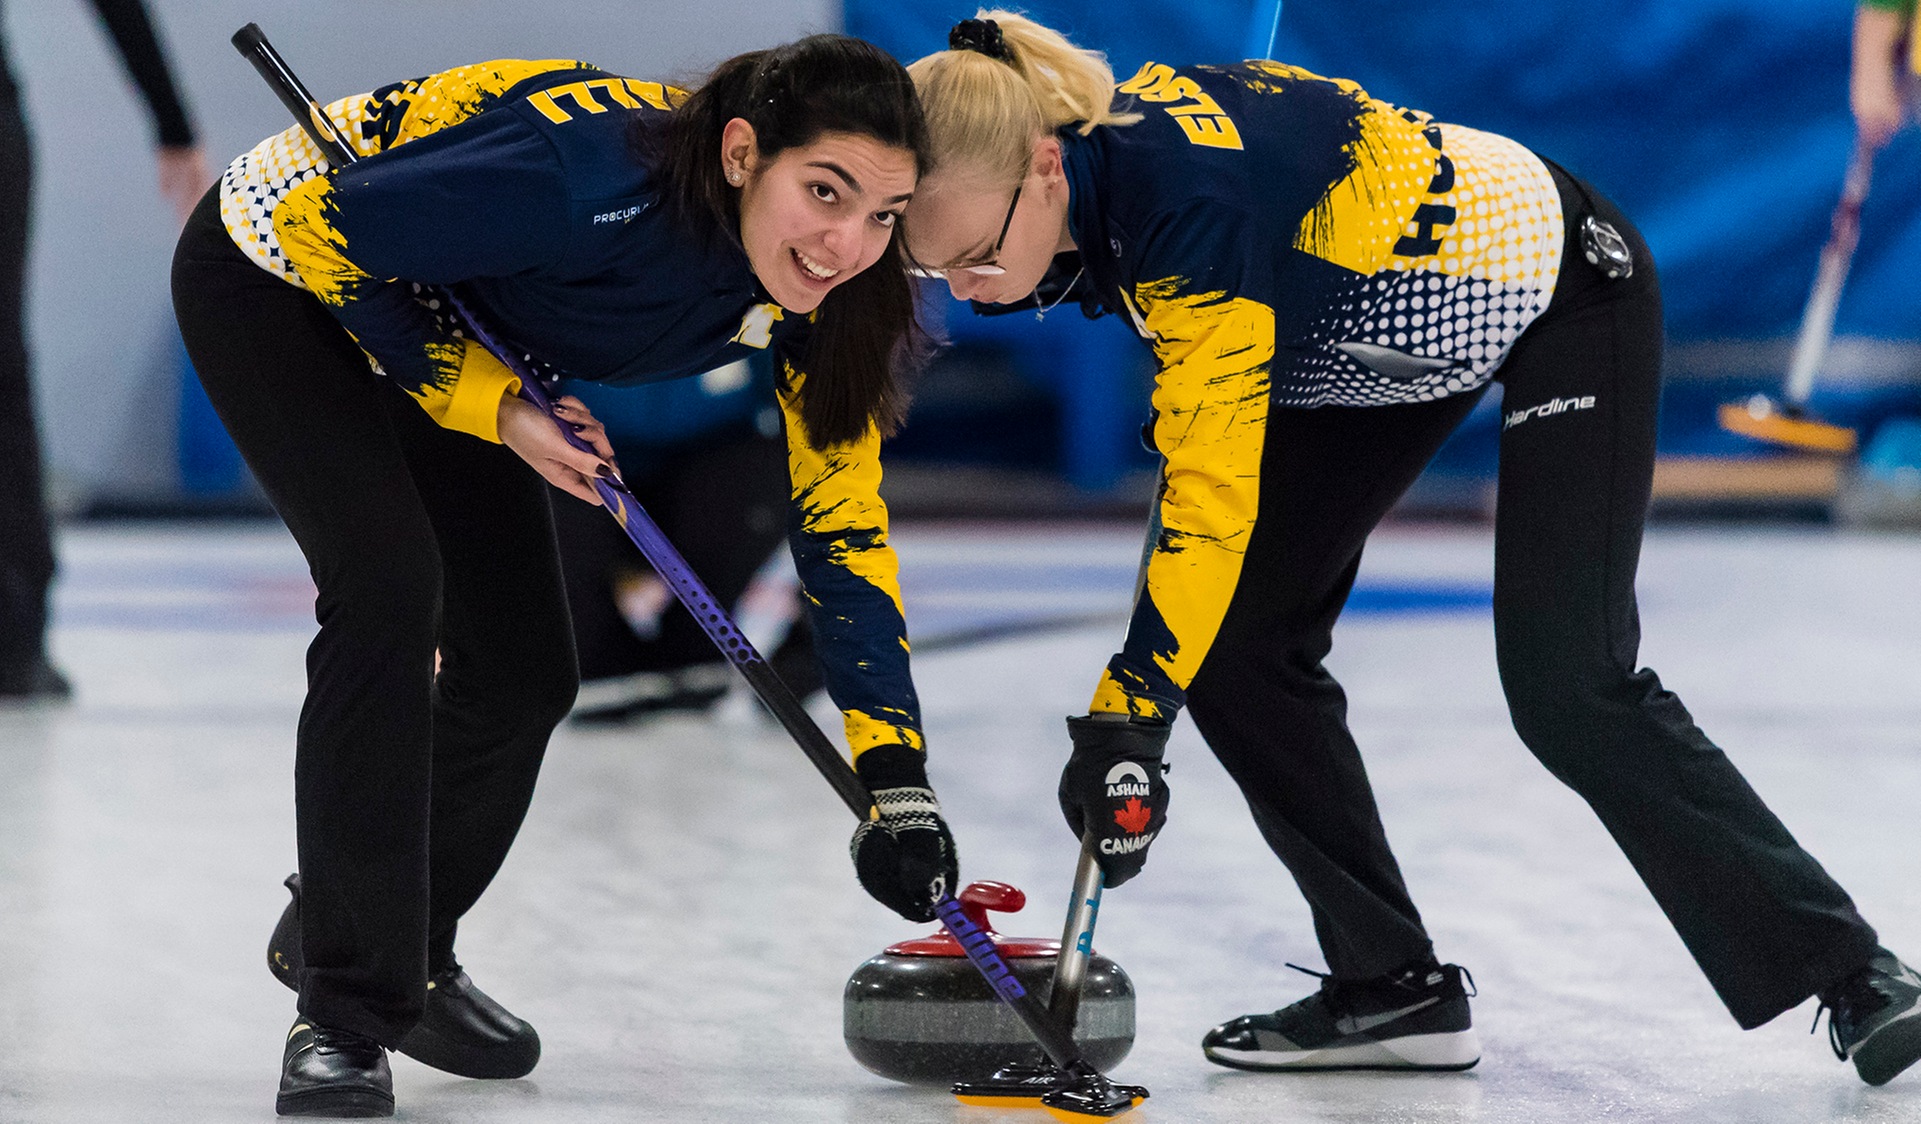 HAWKS SWEEP WAY TO TITLE AT 2019 HUMBER BONSPIEL